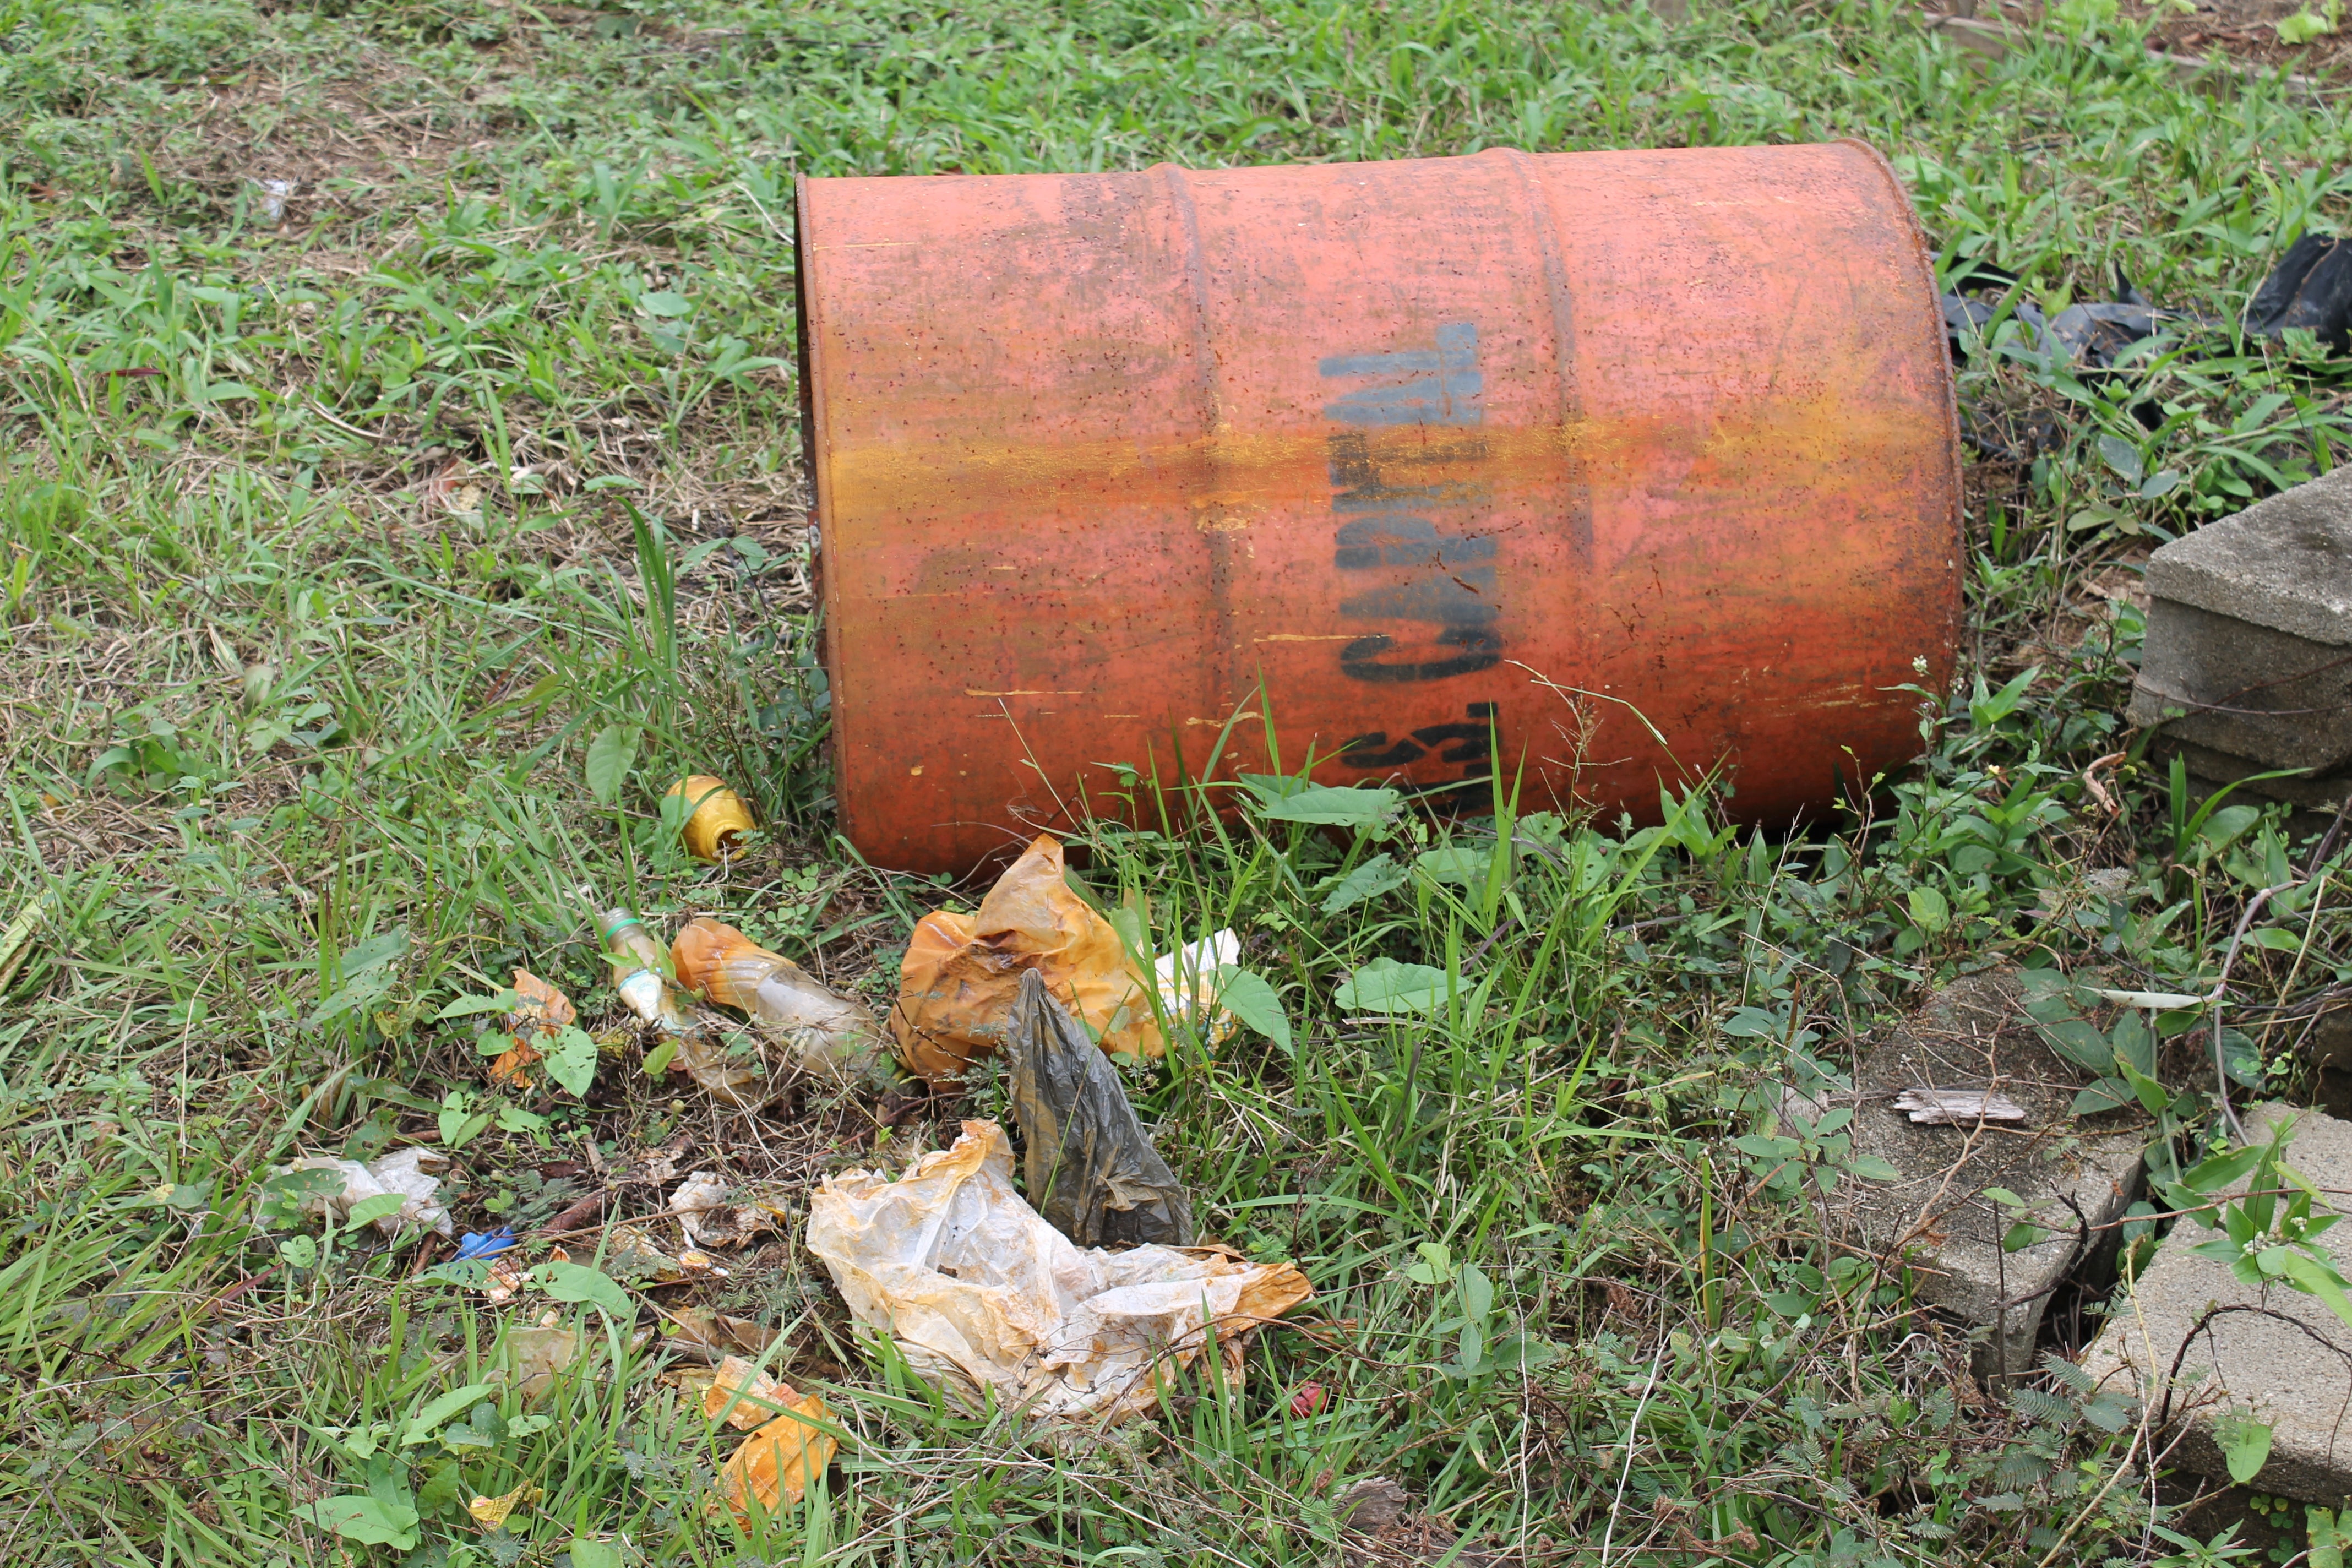 Discarded oil drum from US Capital Energy, in village of Conejo, Toledo, Belize